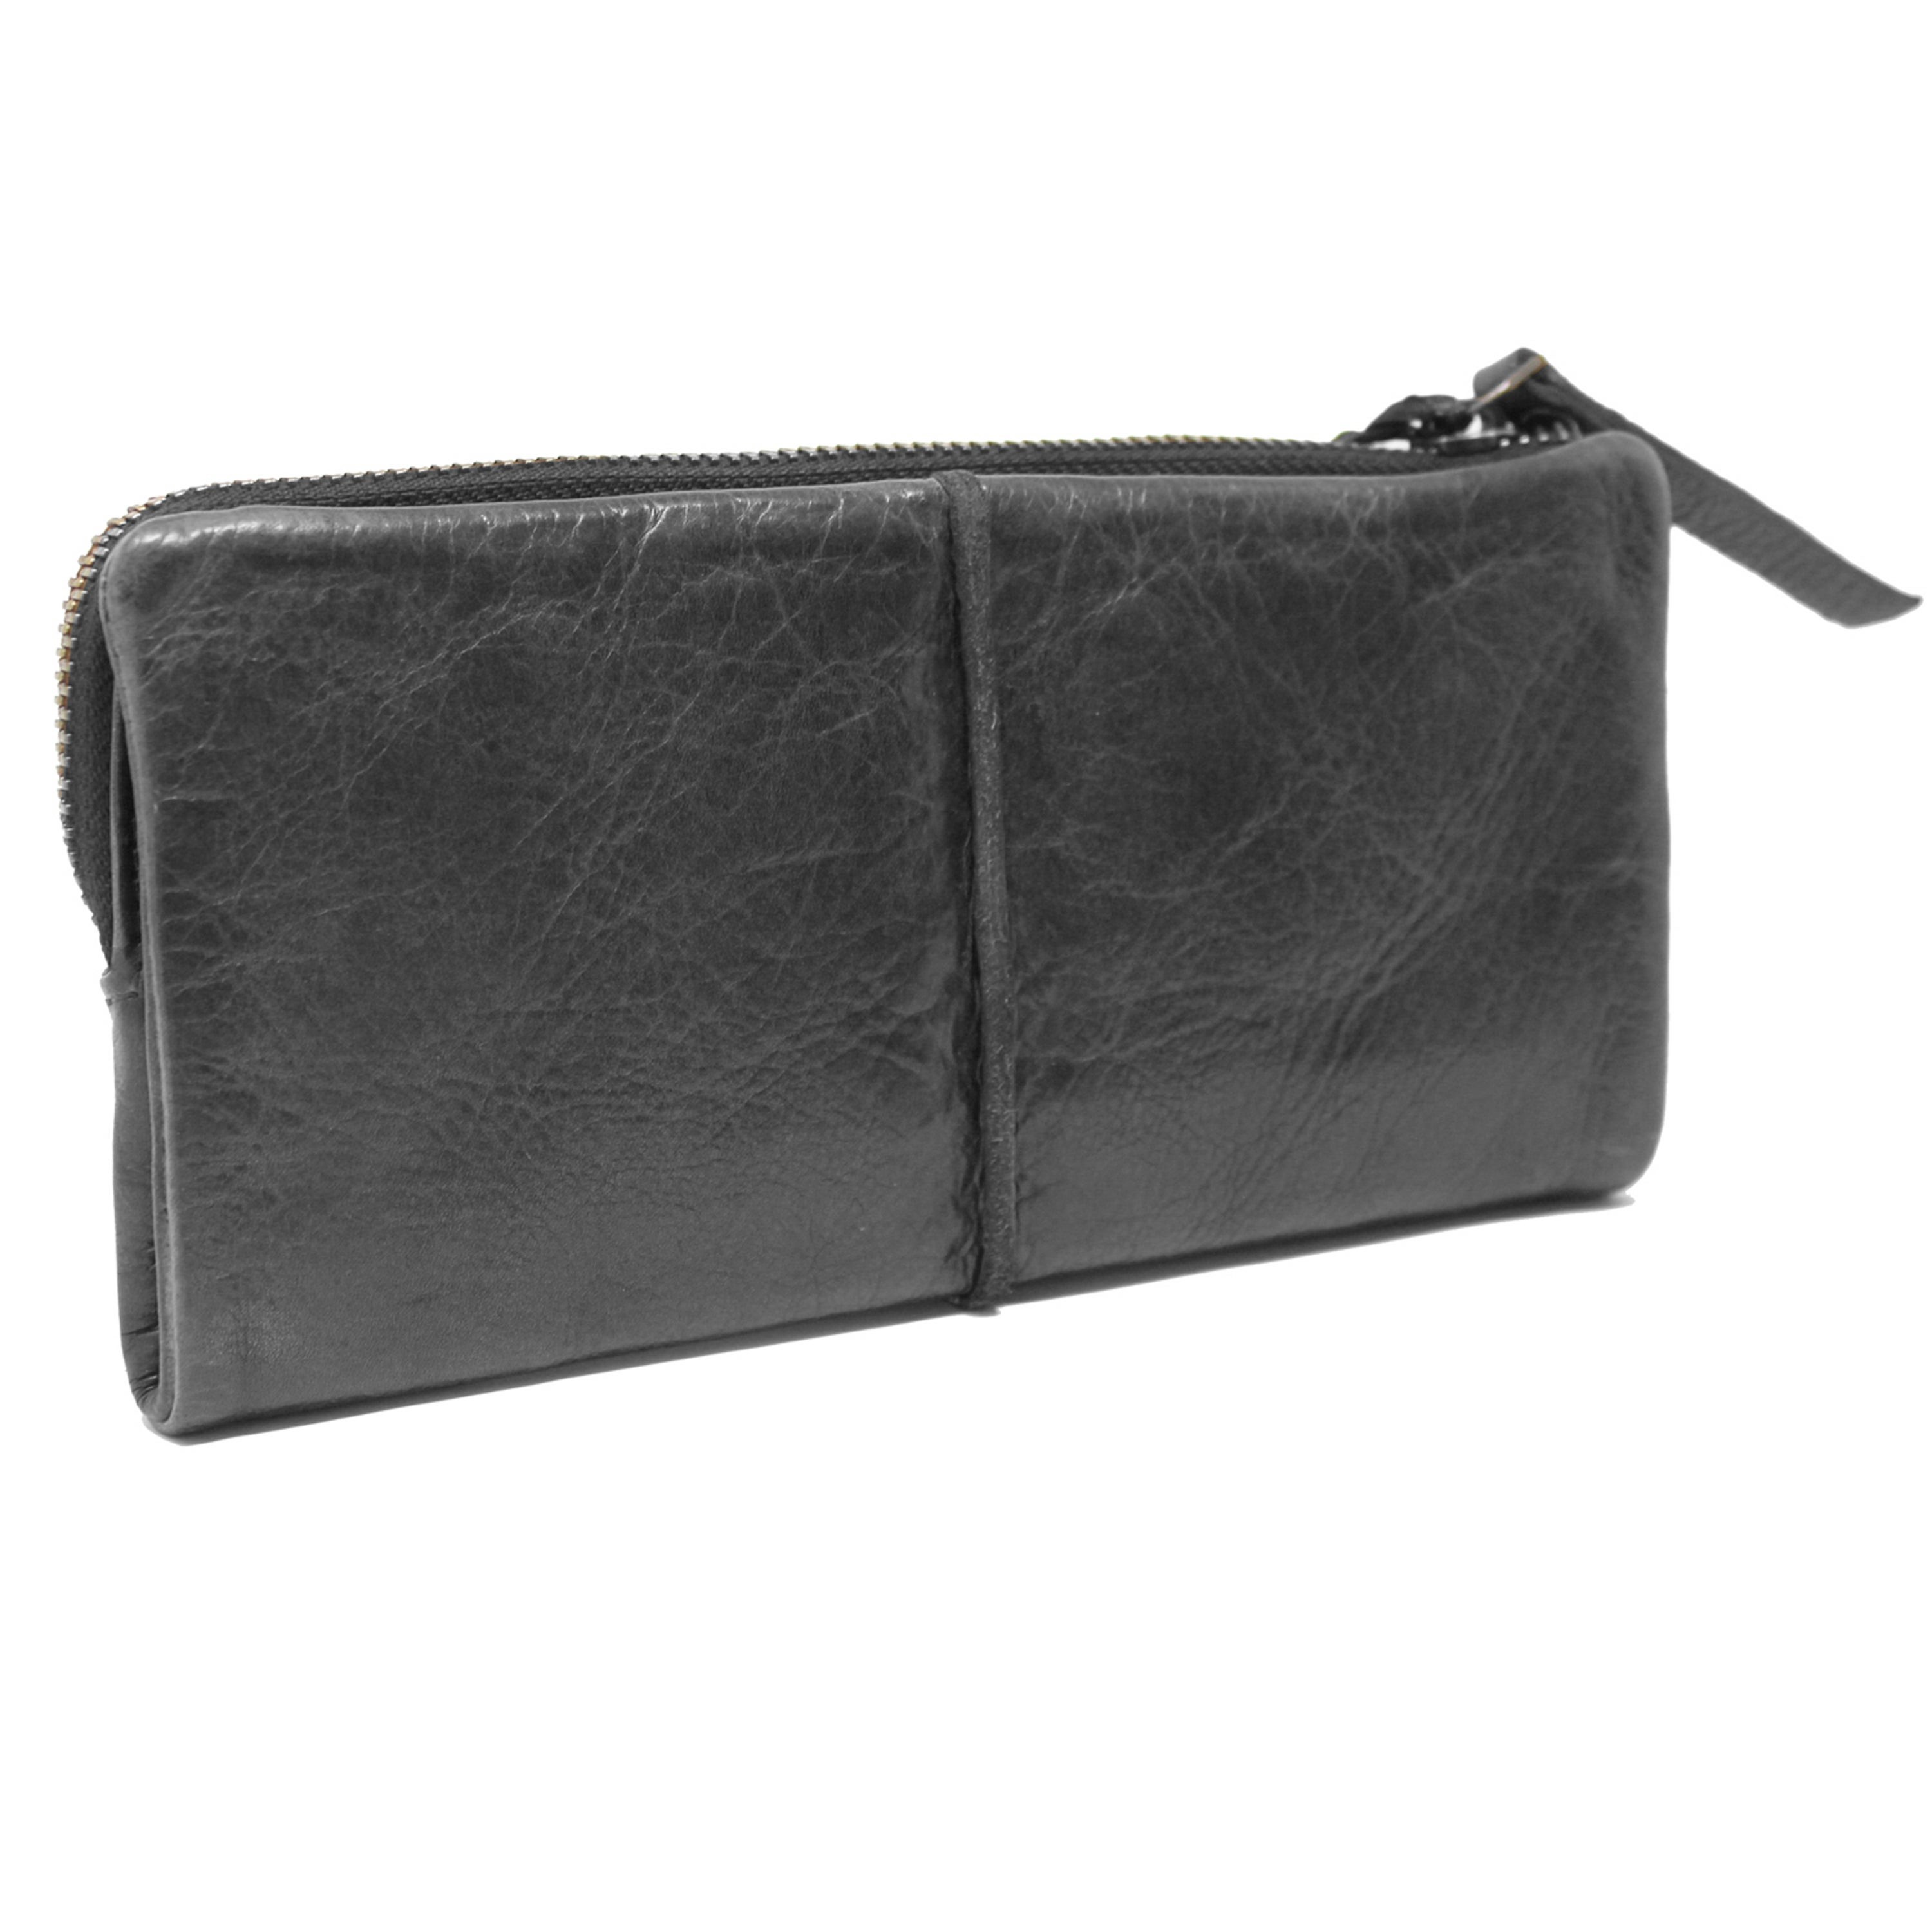 Andi Leather Wallet Black